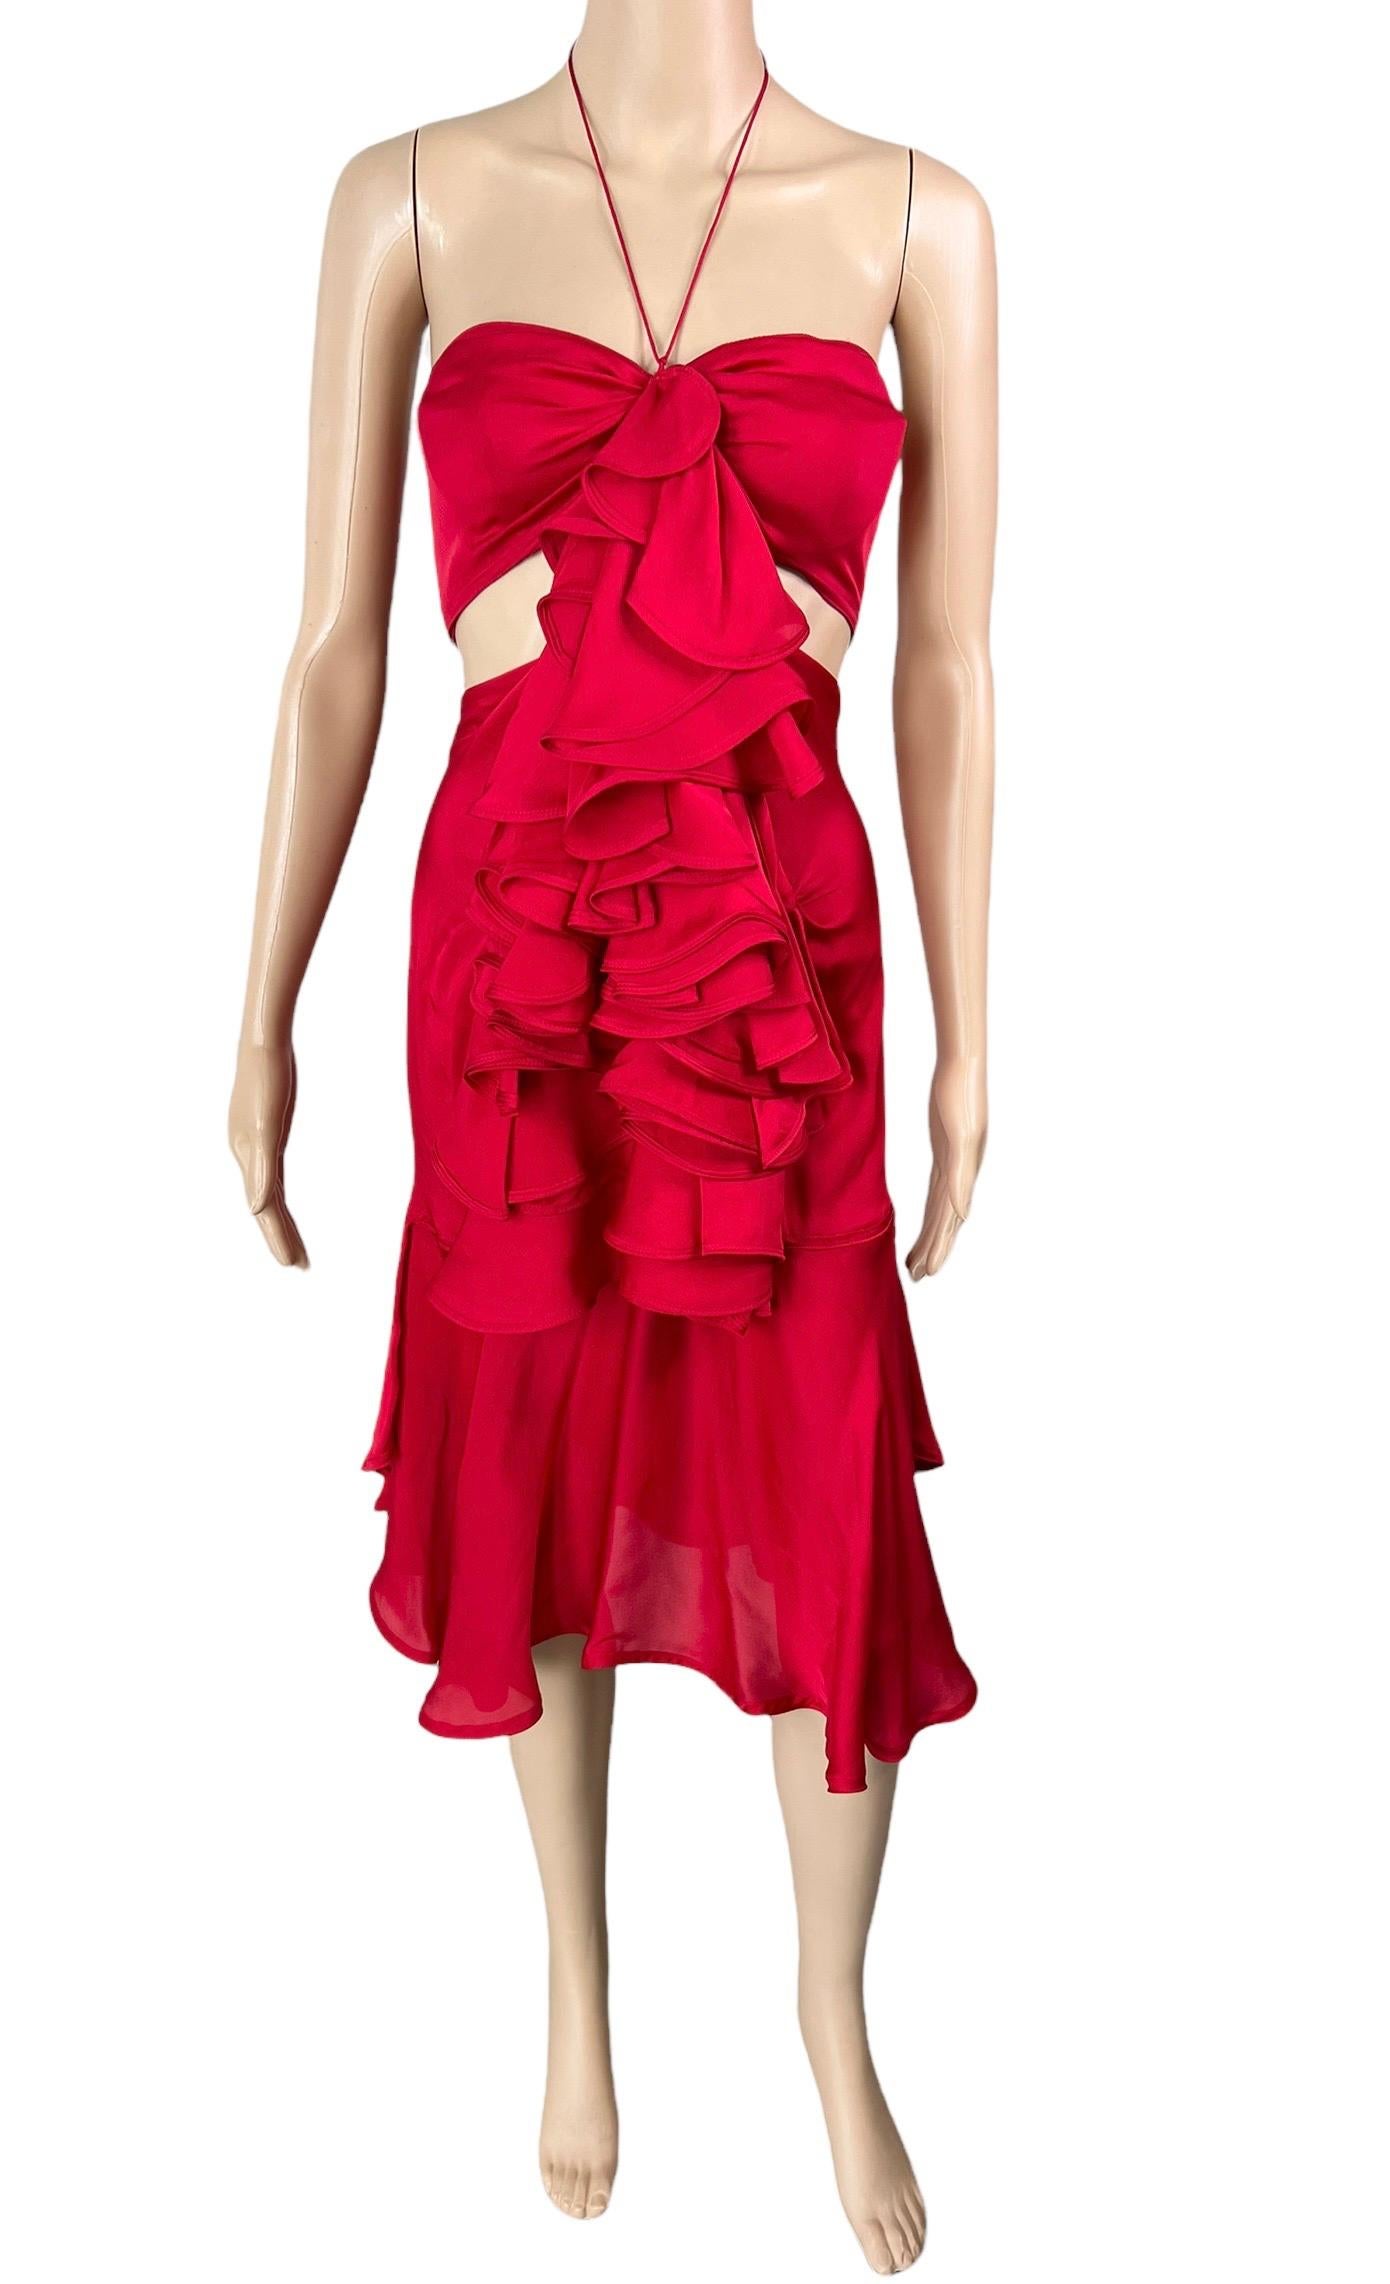 Tom Ford for Yves Saint Laurent  F/W 2003 Runway Ruffled Cutout Bra Red Dress  For Sale 1